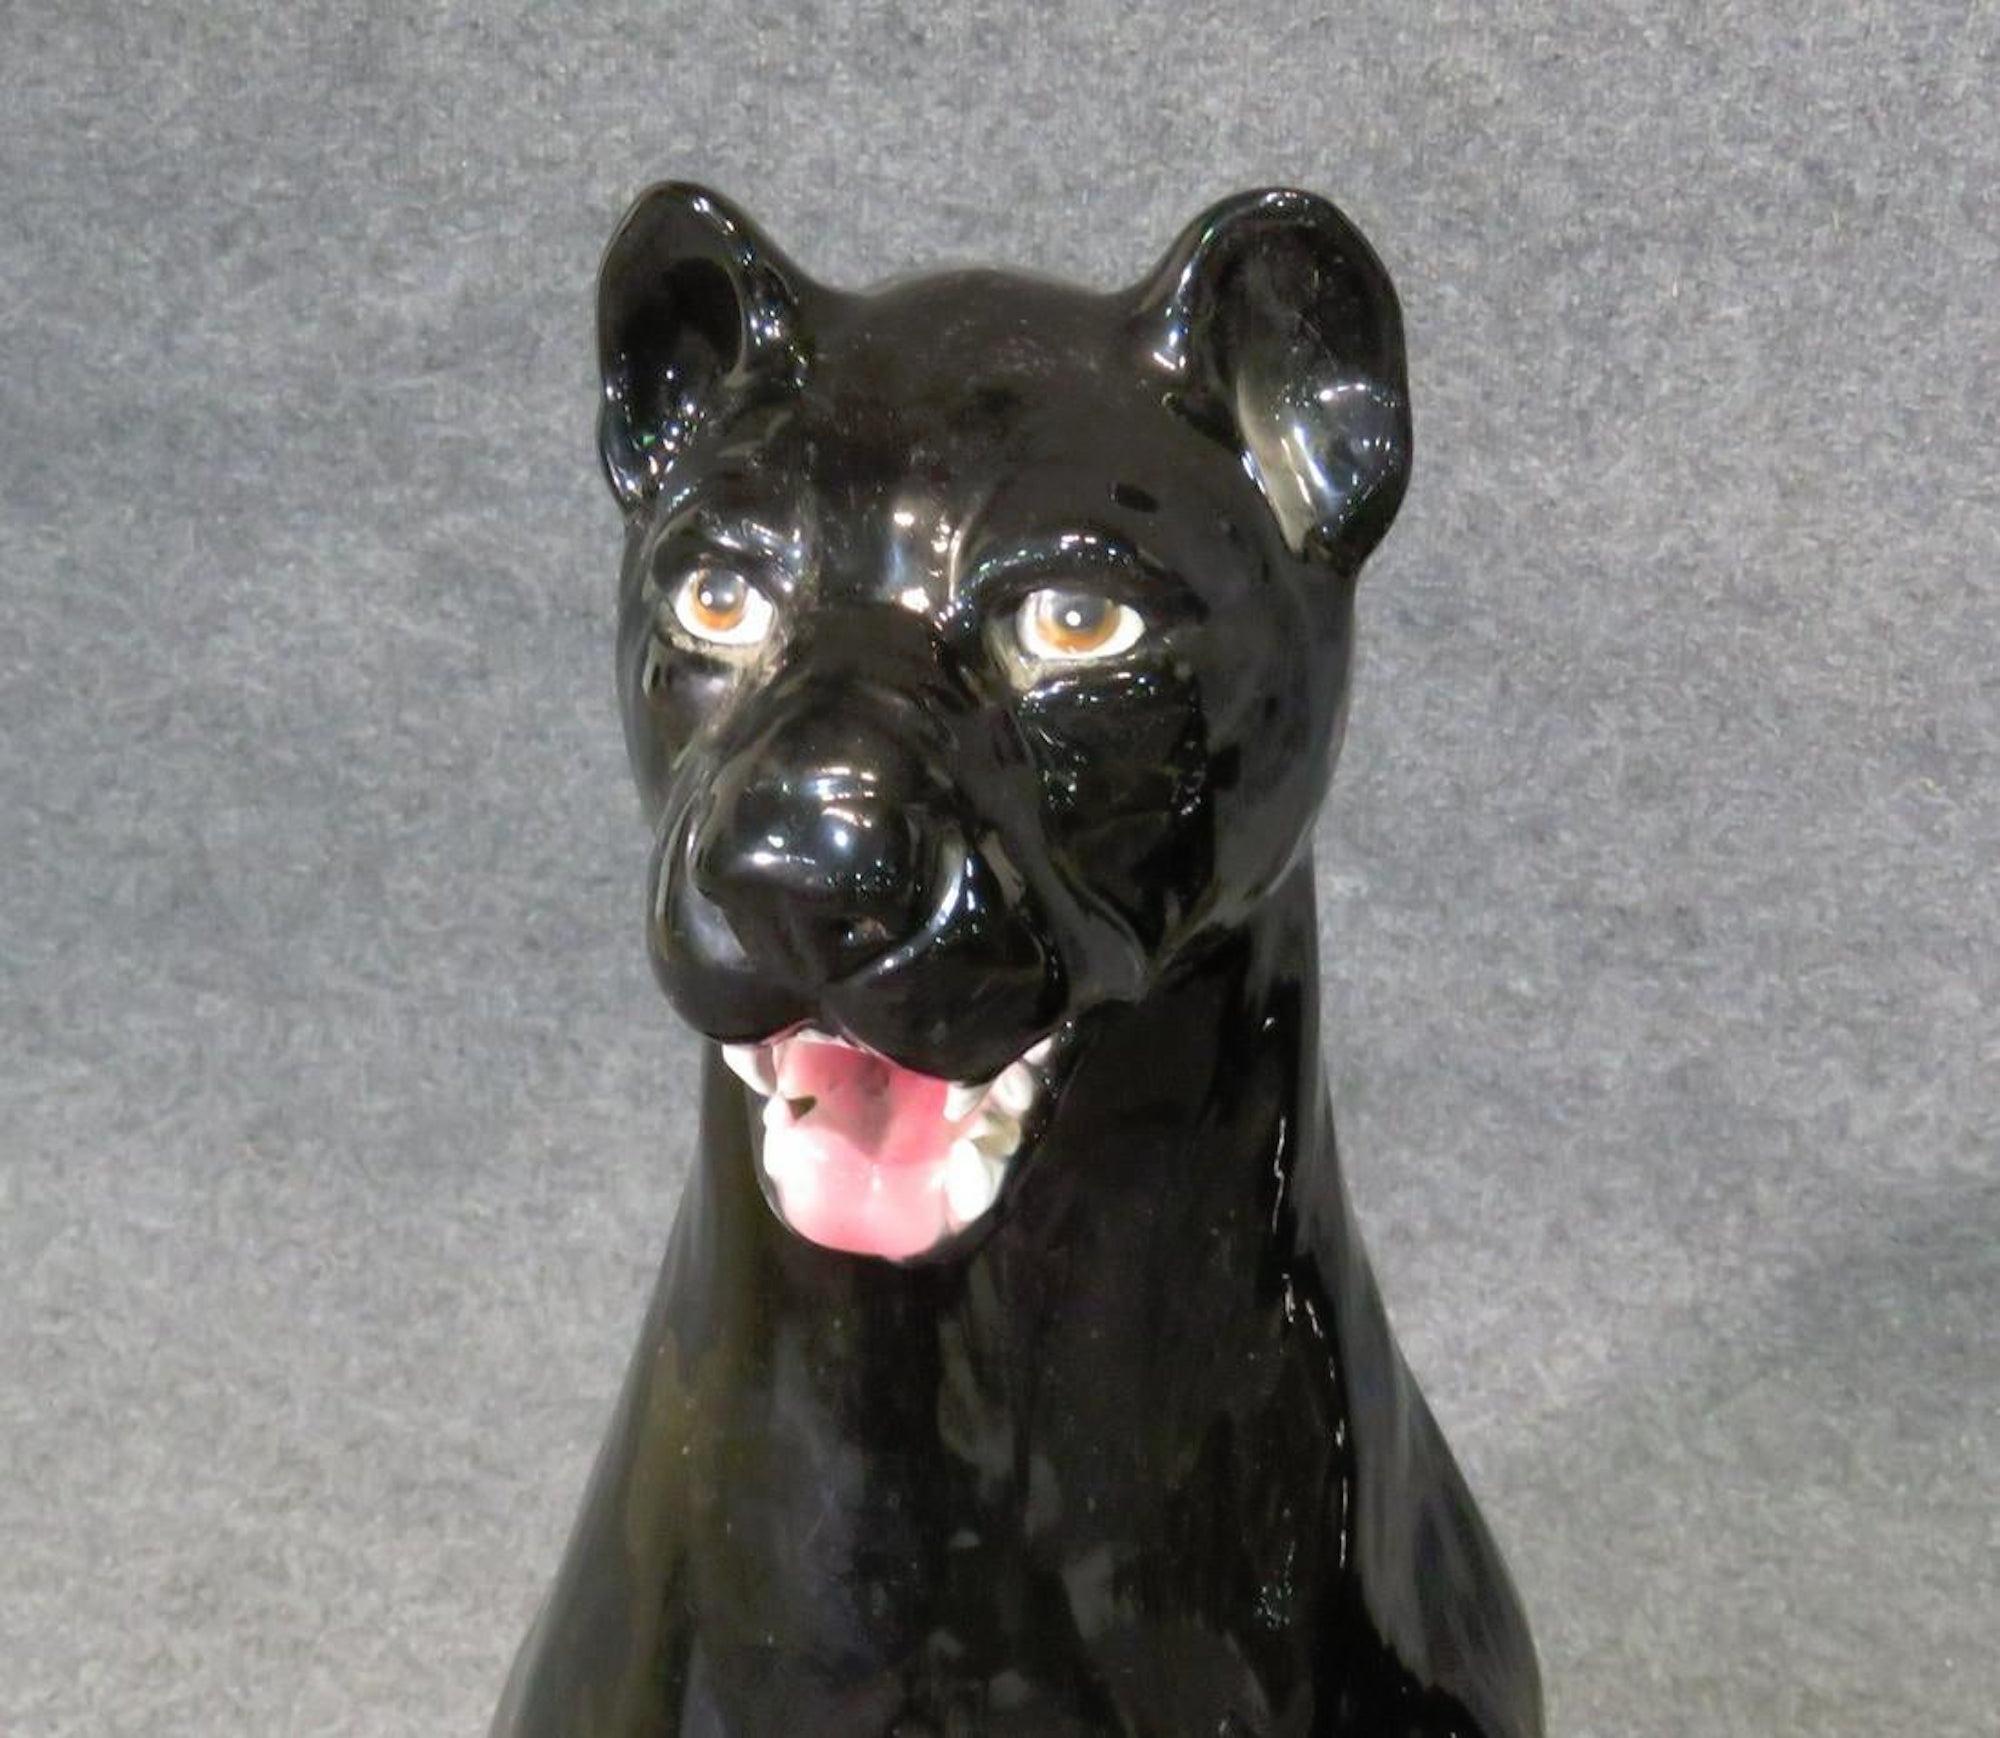 Pair of glazed ceramic sitting panthers in black.
(Please confirm item location - NY or NJ - with dealer).
 